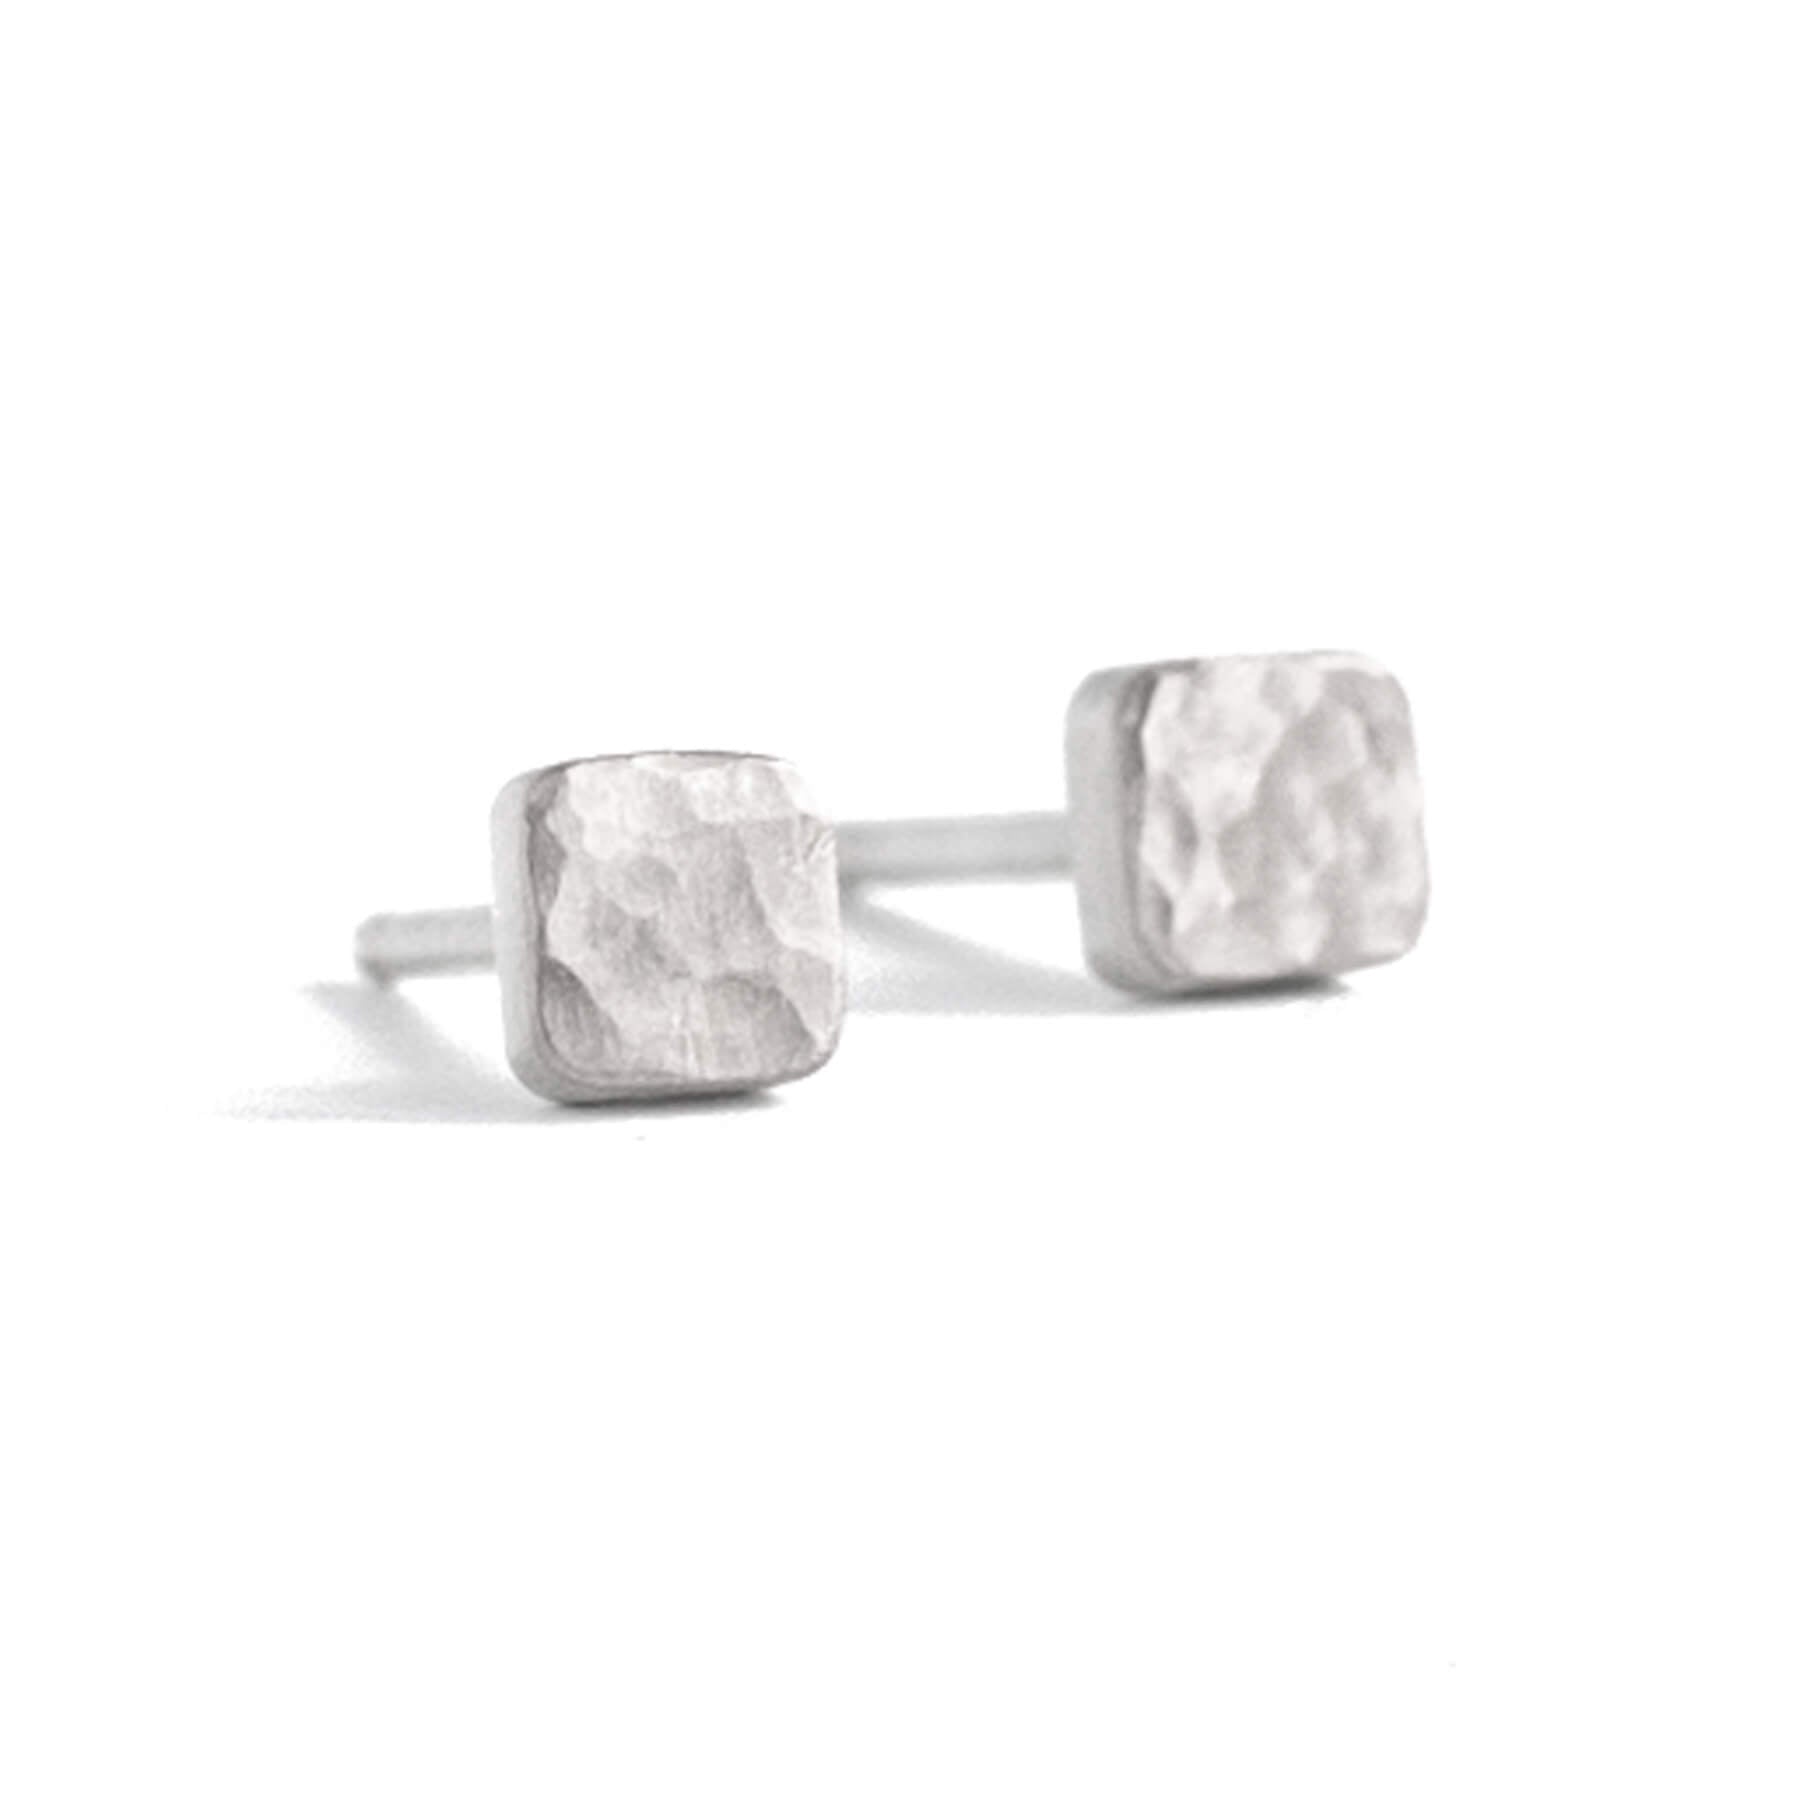 Sterling silver square studs in round and linear hammered finish. Handmade by EC Design Jewelry in Minneapolis, MN using recycled metal.